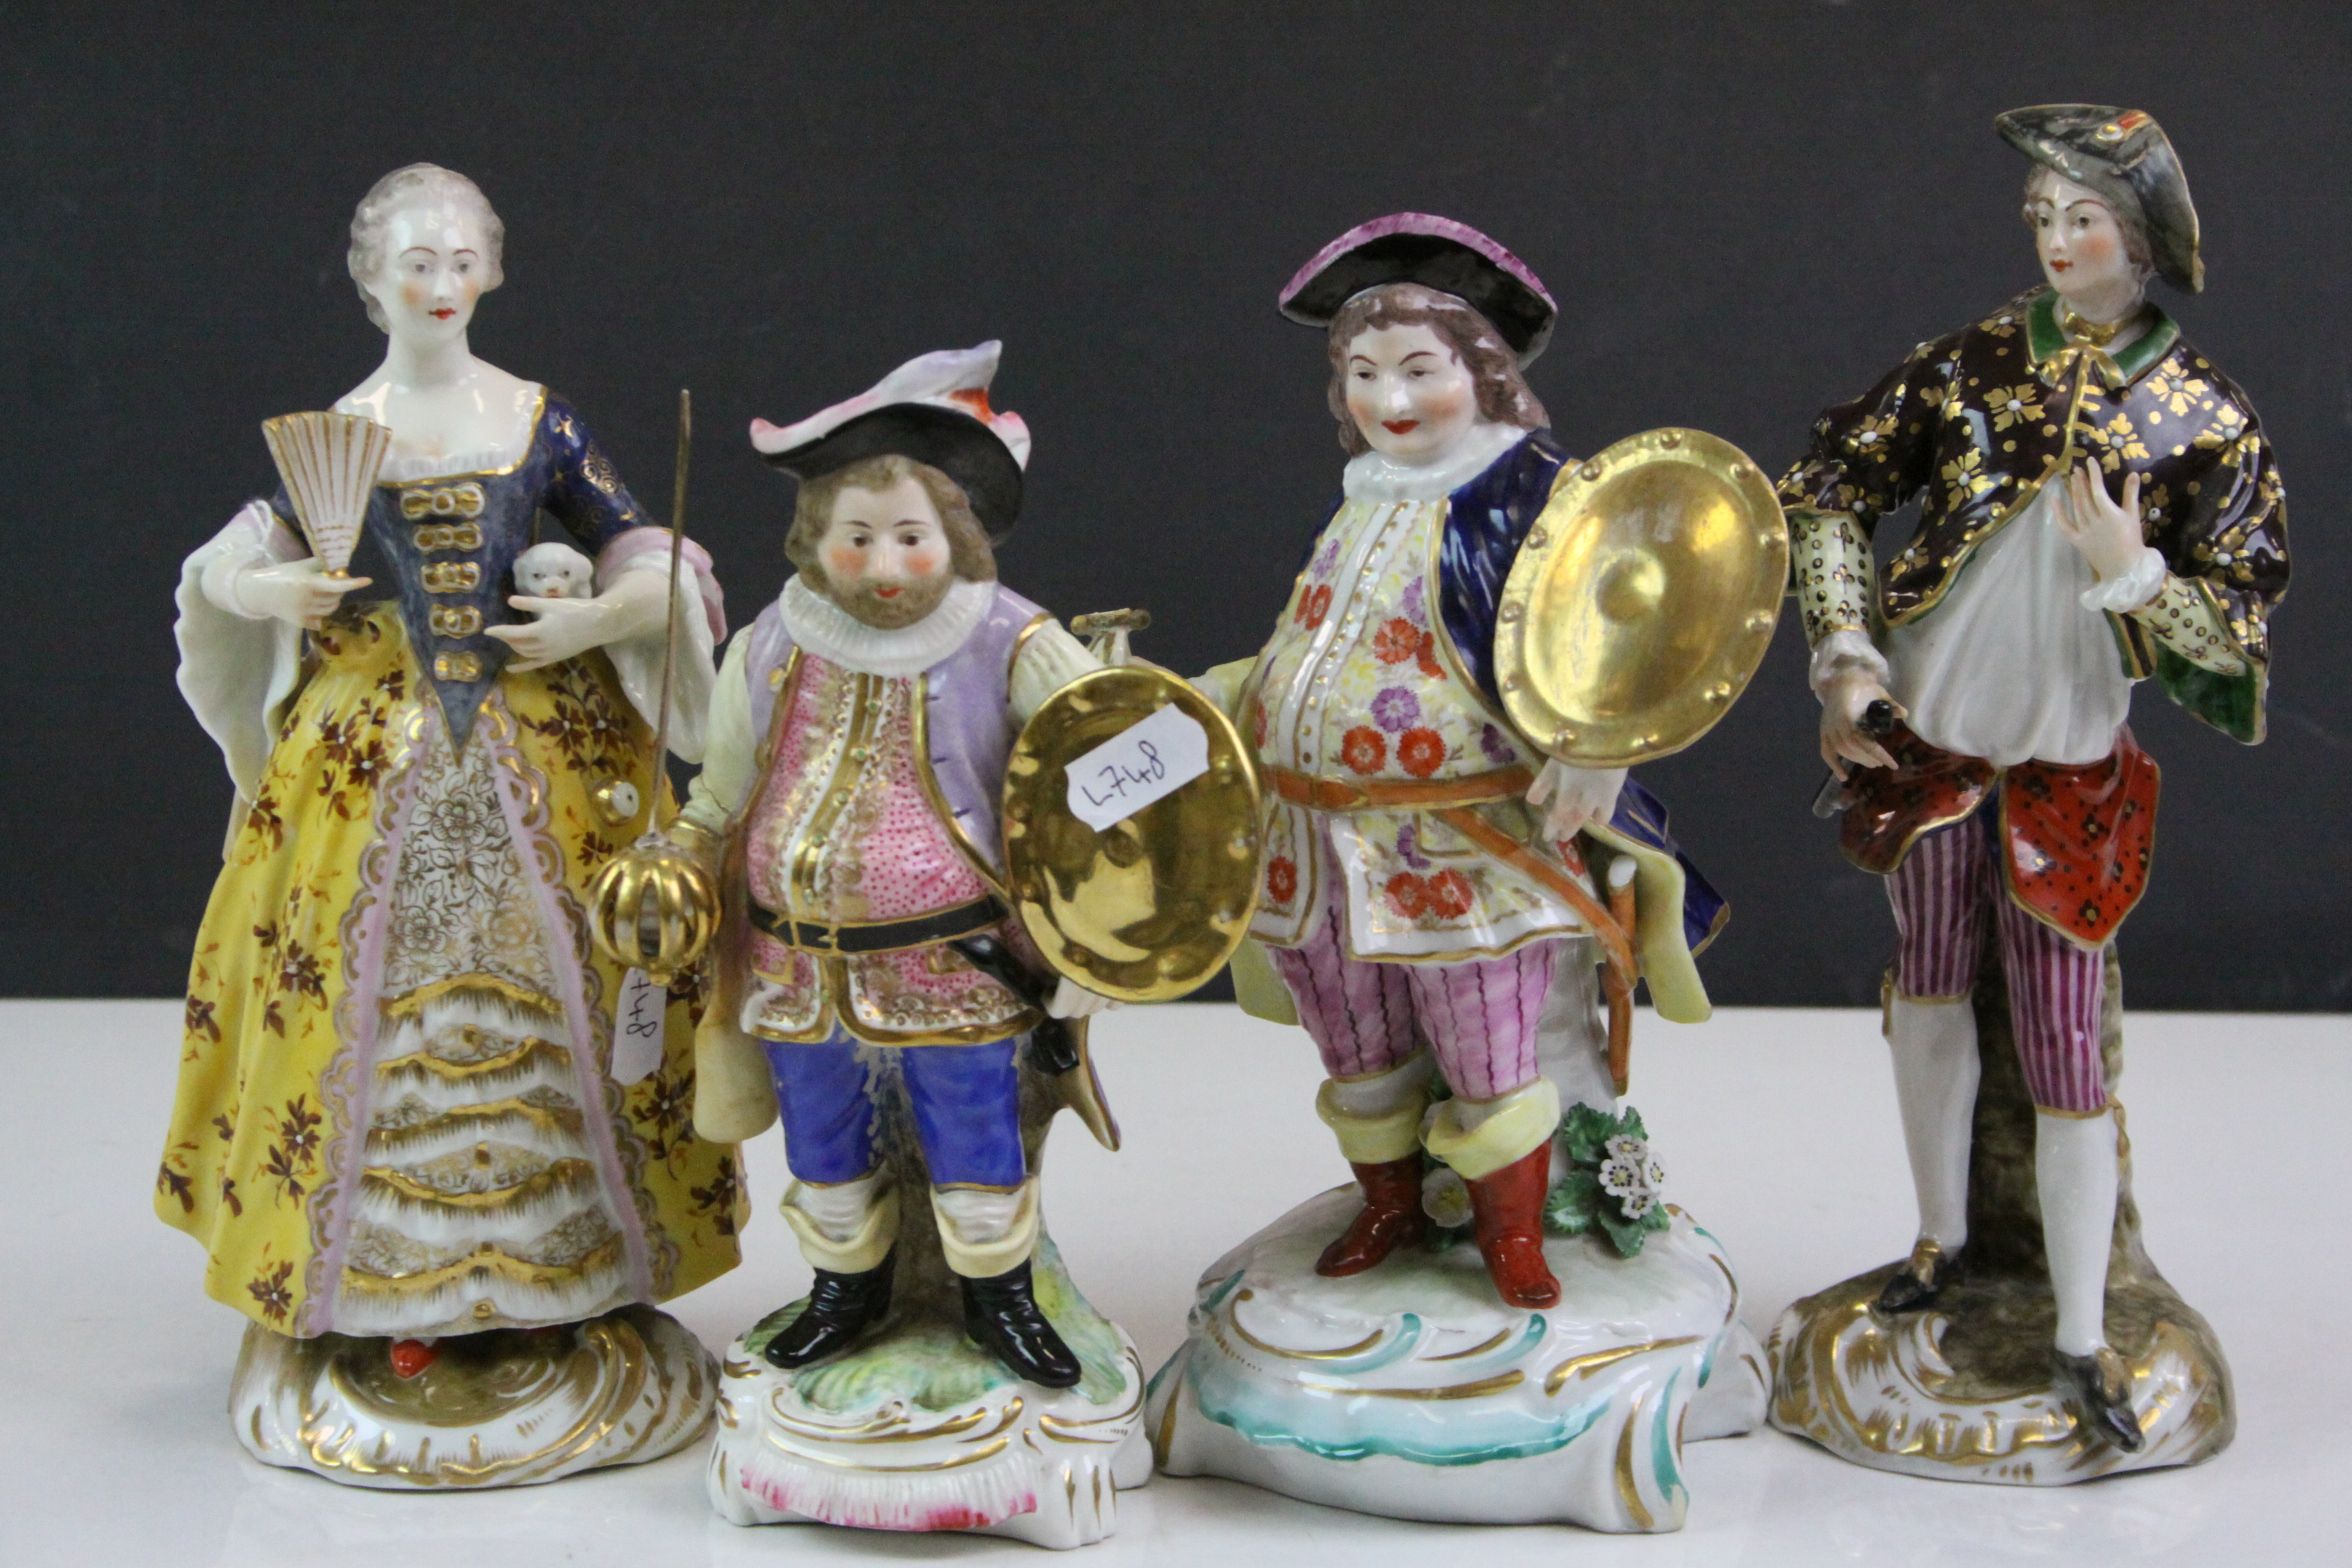 Three 19th Century Derby Porcelain figurines, one modelled as a figure with paunch carrying